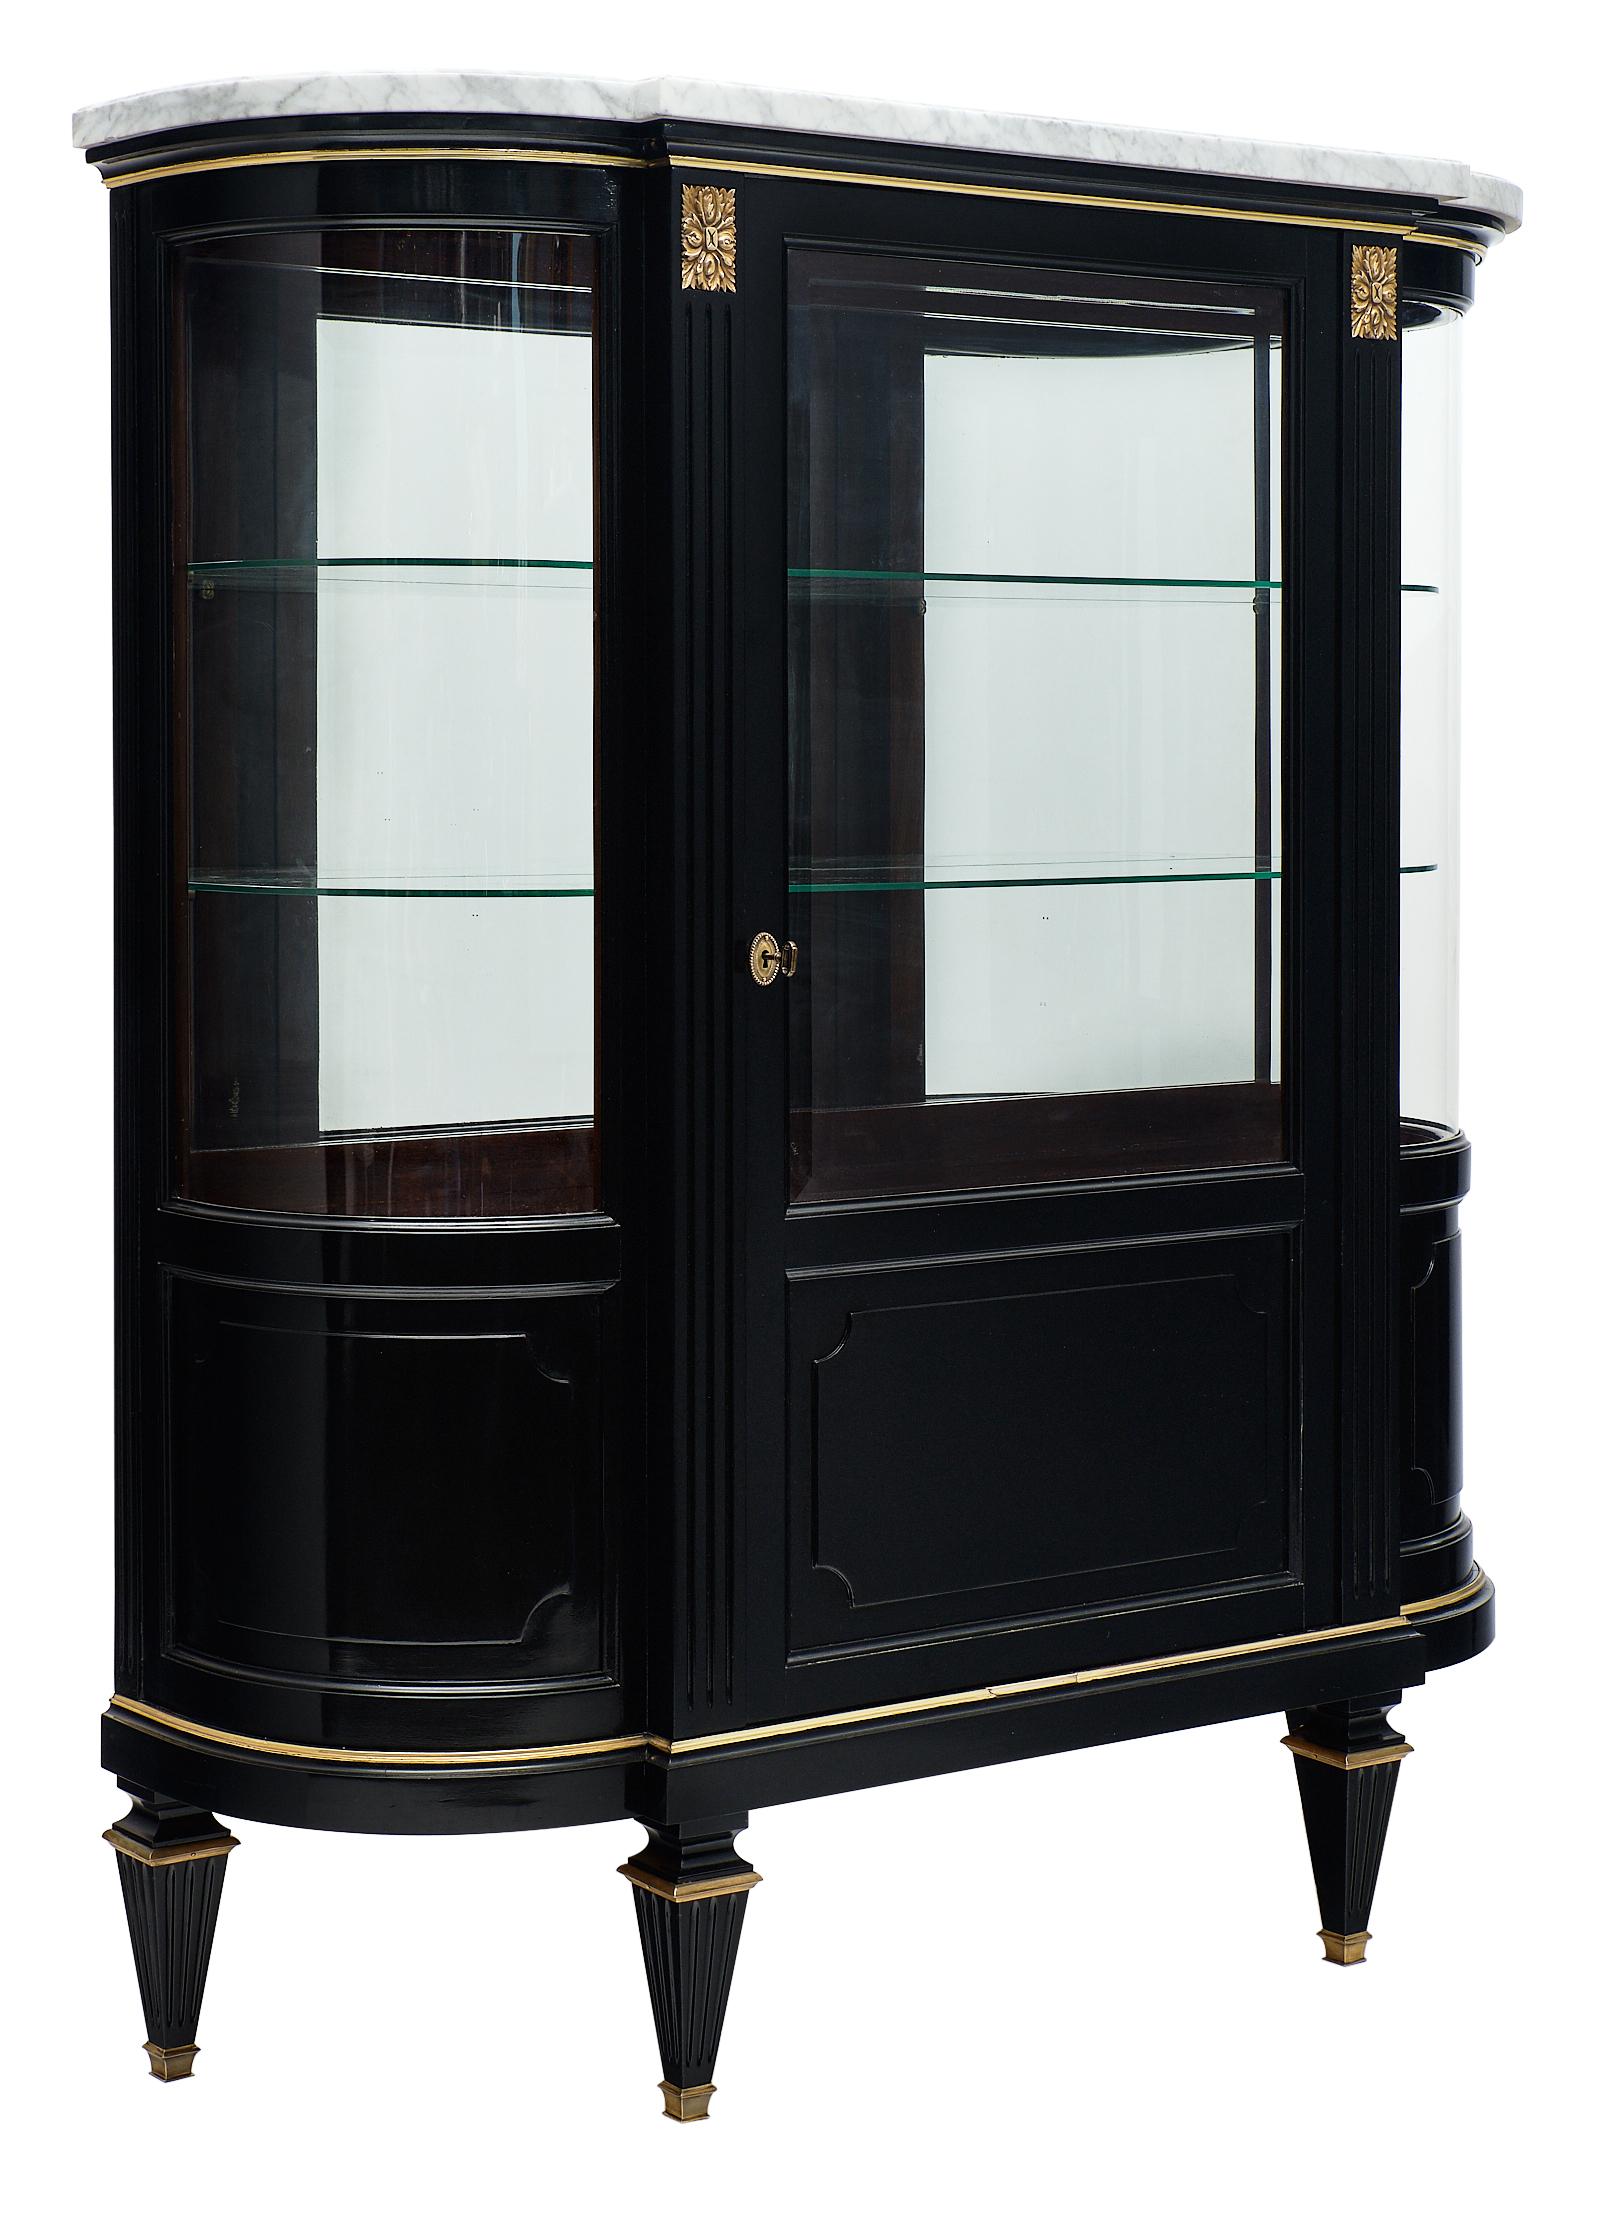 Louis XVI style antique bookcase with Carrara marble top. This piece is made of solid mahogany with all original brass trim, hardware, and mirrored interior. The glass shelves give the interior additional sophistication. This argentier (display